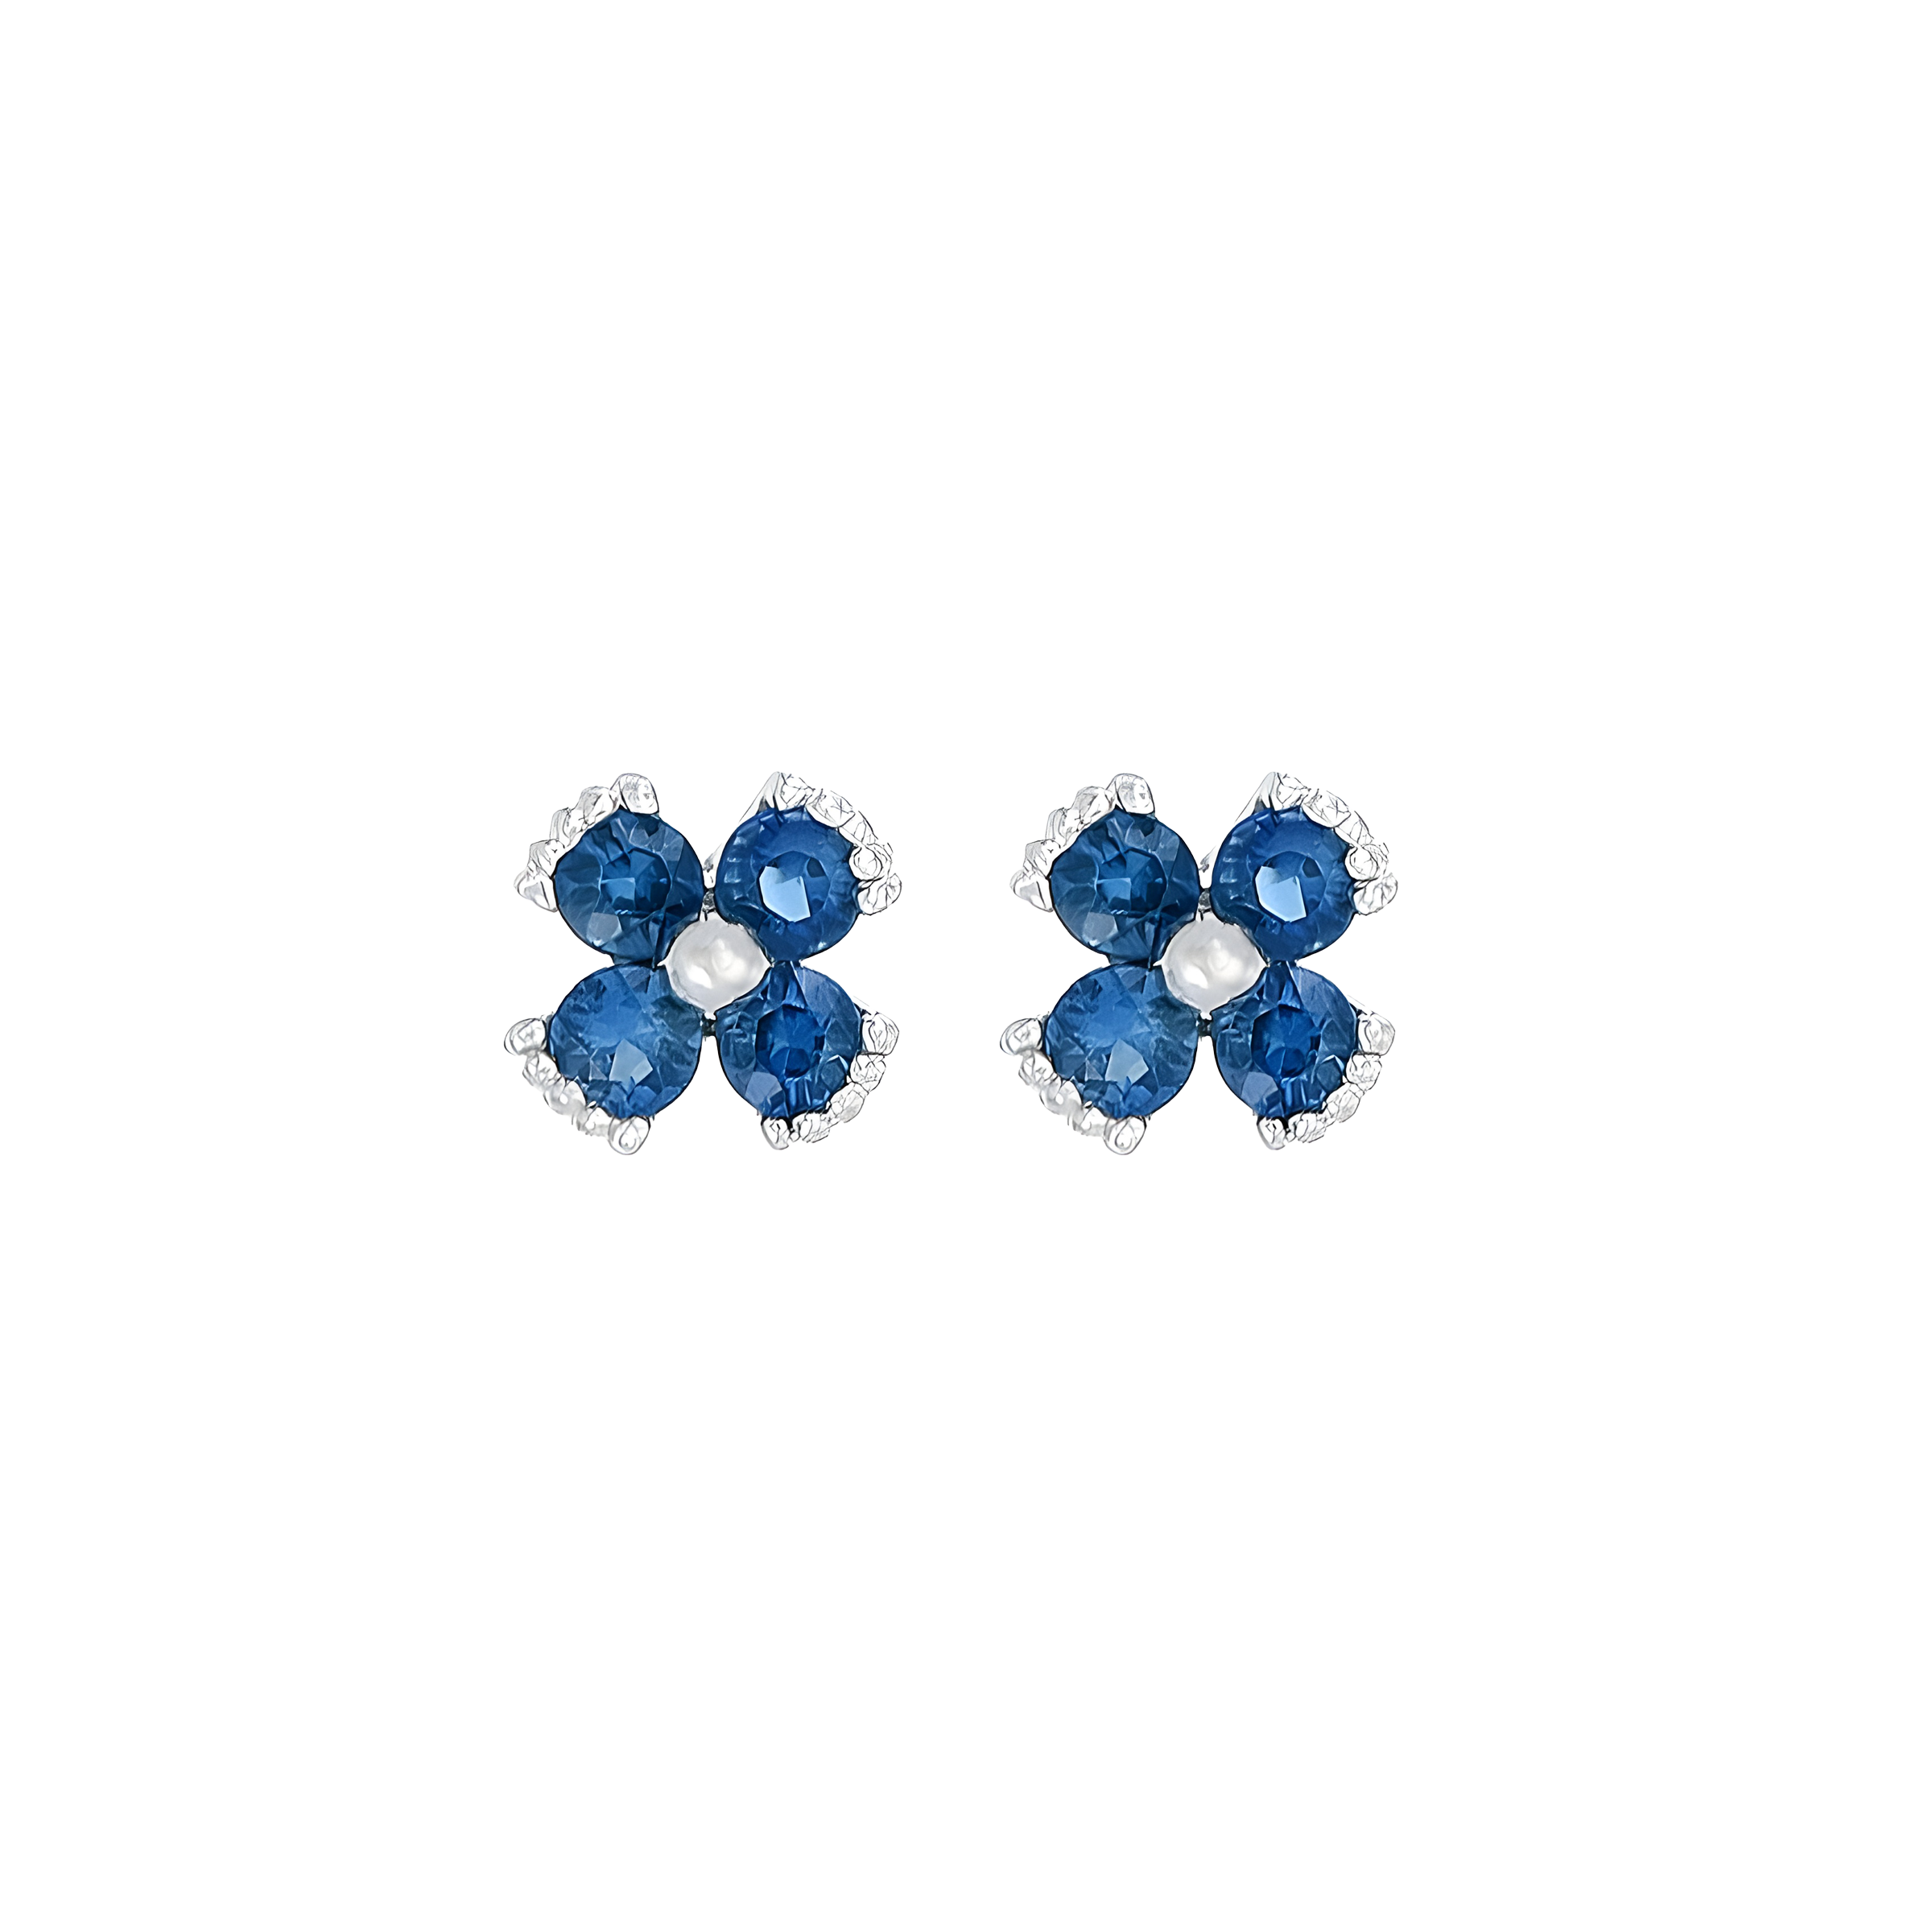 NATURAL SAPPHIRE VINTAGE STYLE STUD EARRINGS 14K WHITE GOLD FILIGREE BLUE  ROUND